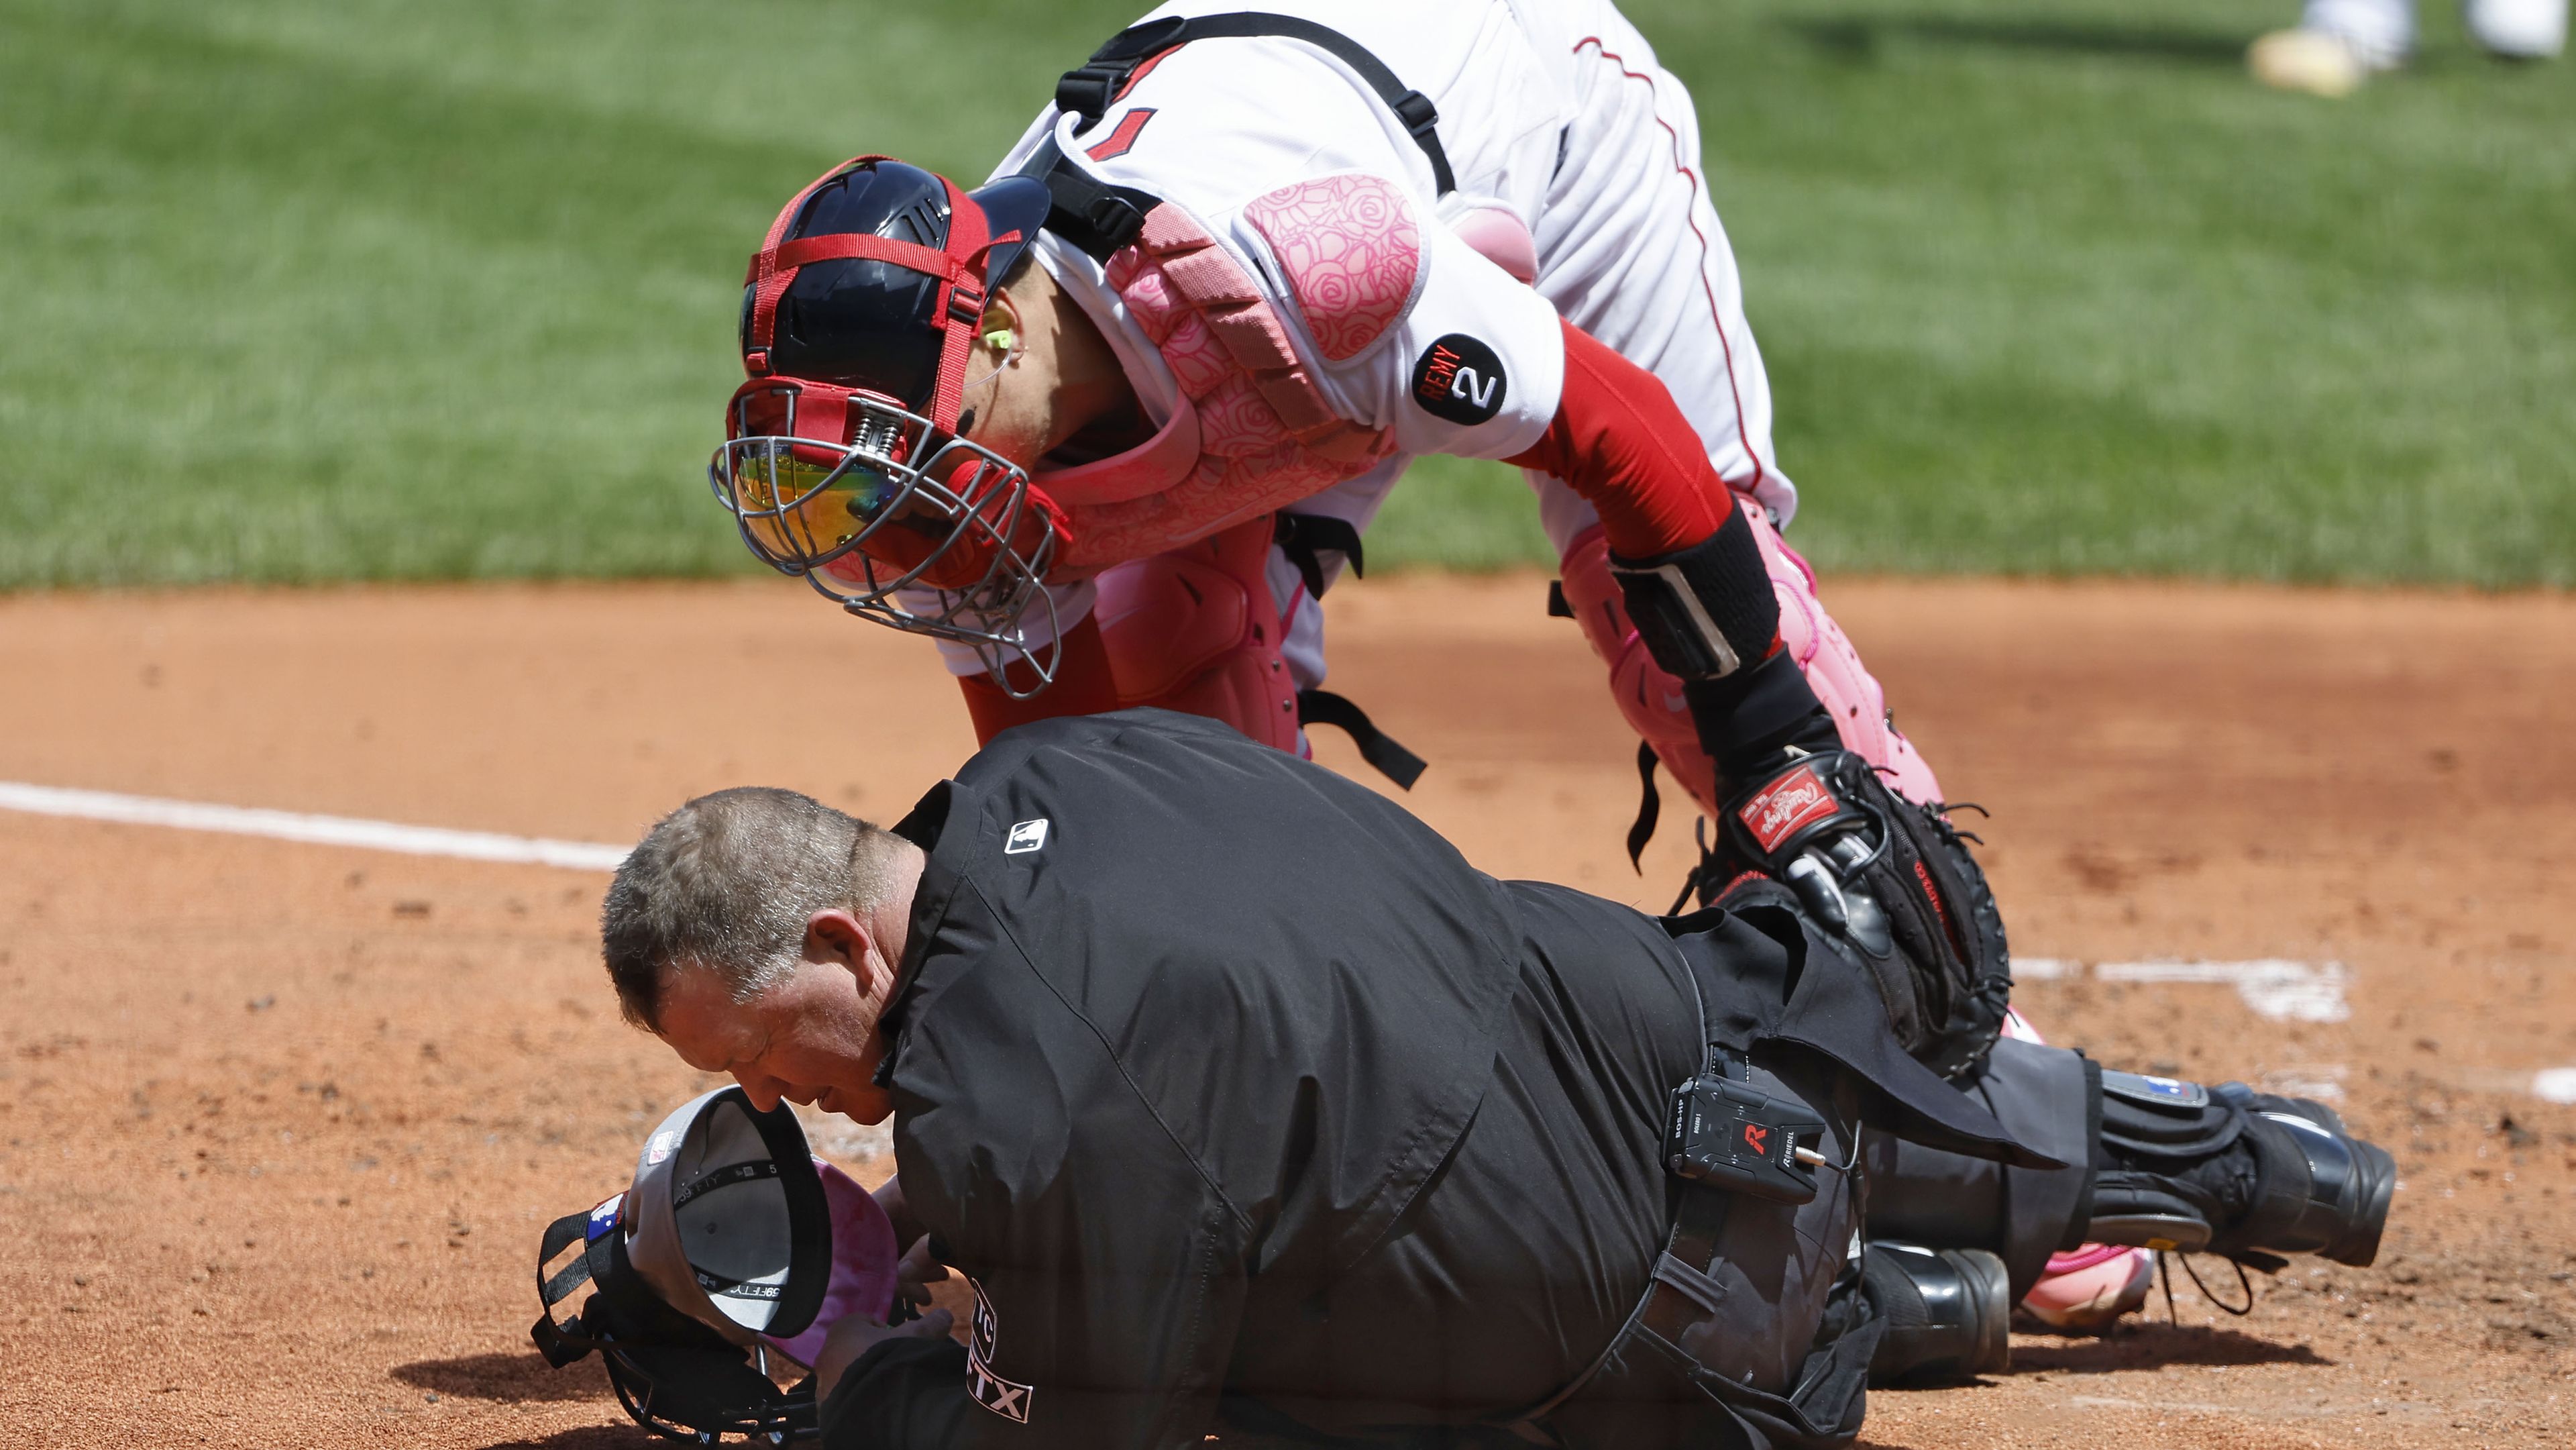 Boston&#x27;s Christian Vazquez checks on umpire Ron Kulpa after he was struck by a foul ball.